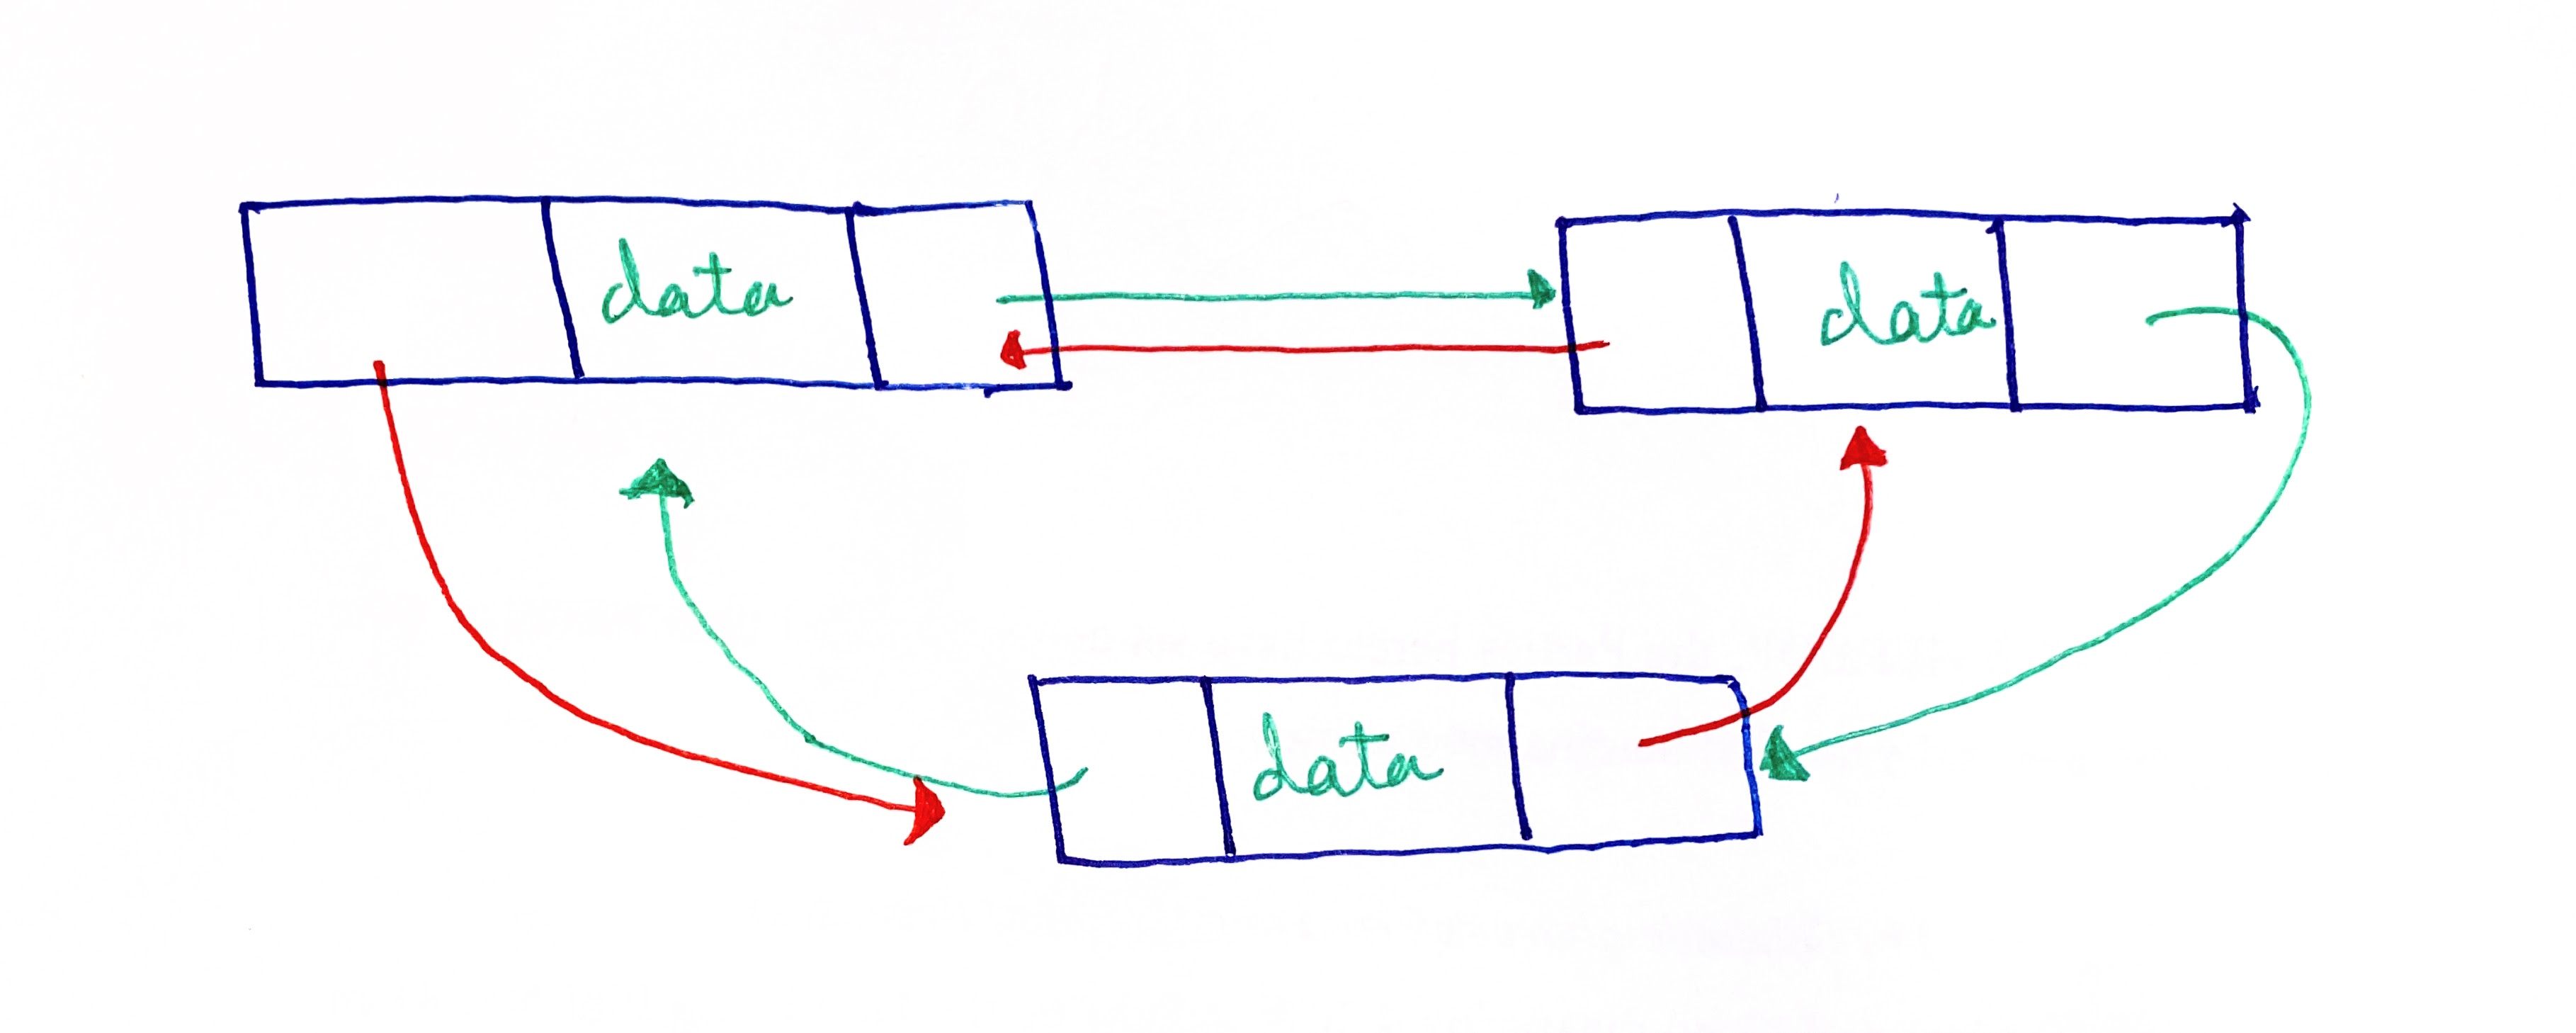 Doubly linked circular linked list